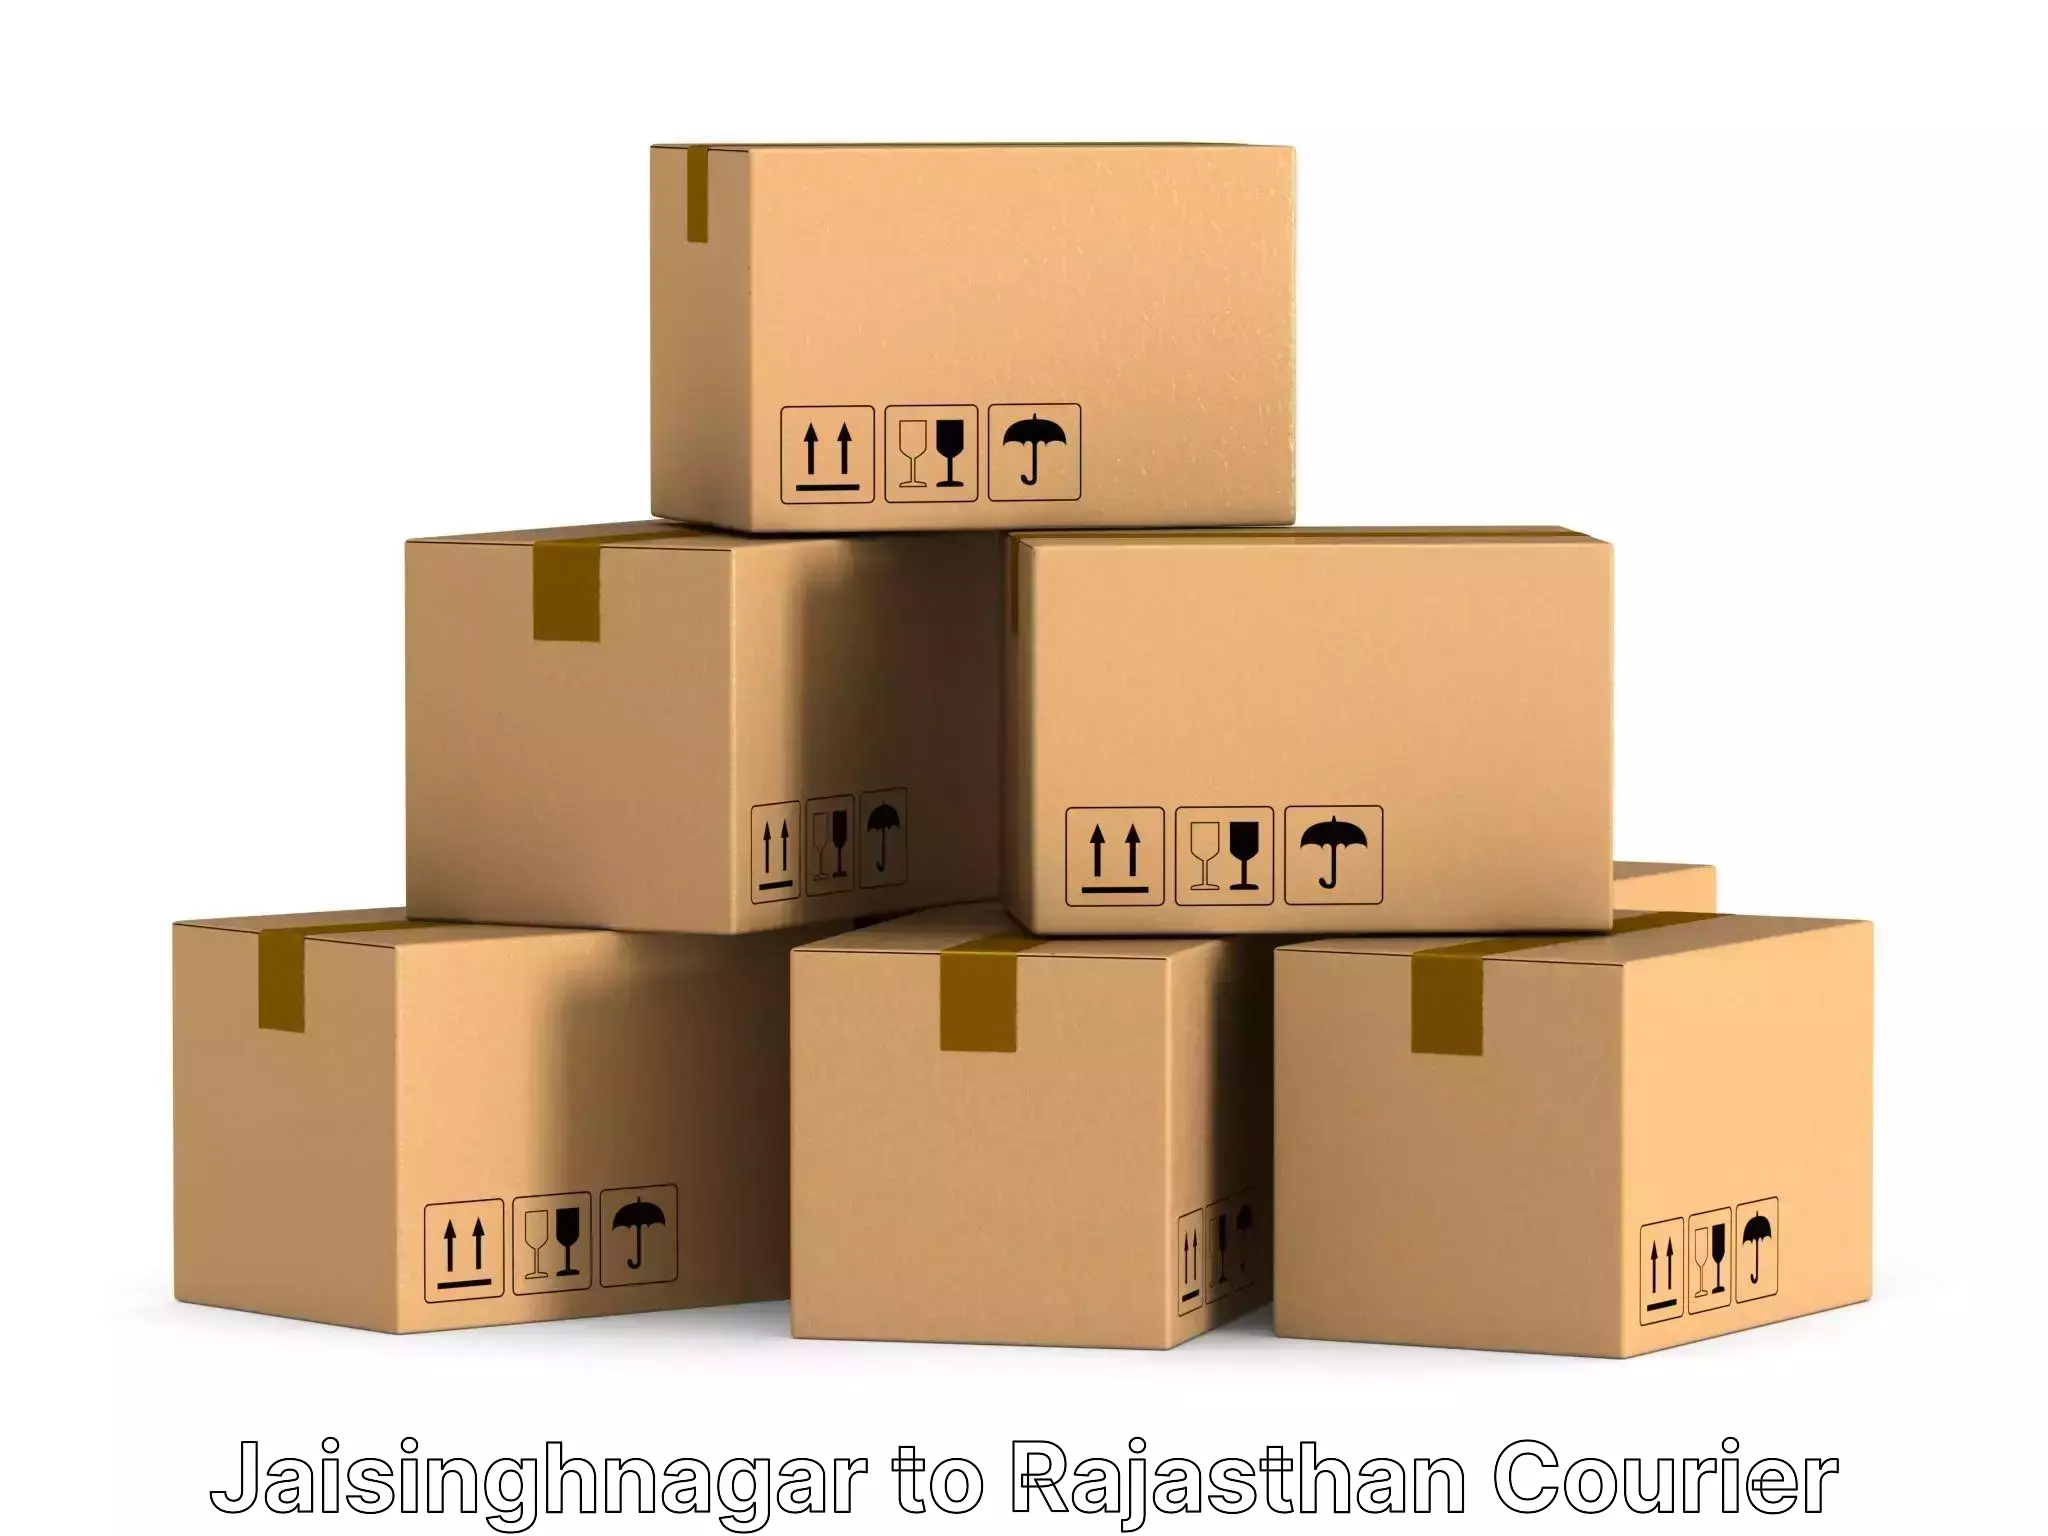 Quality relocation services in Jaisinghnagar to Banar